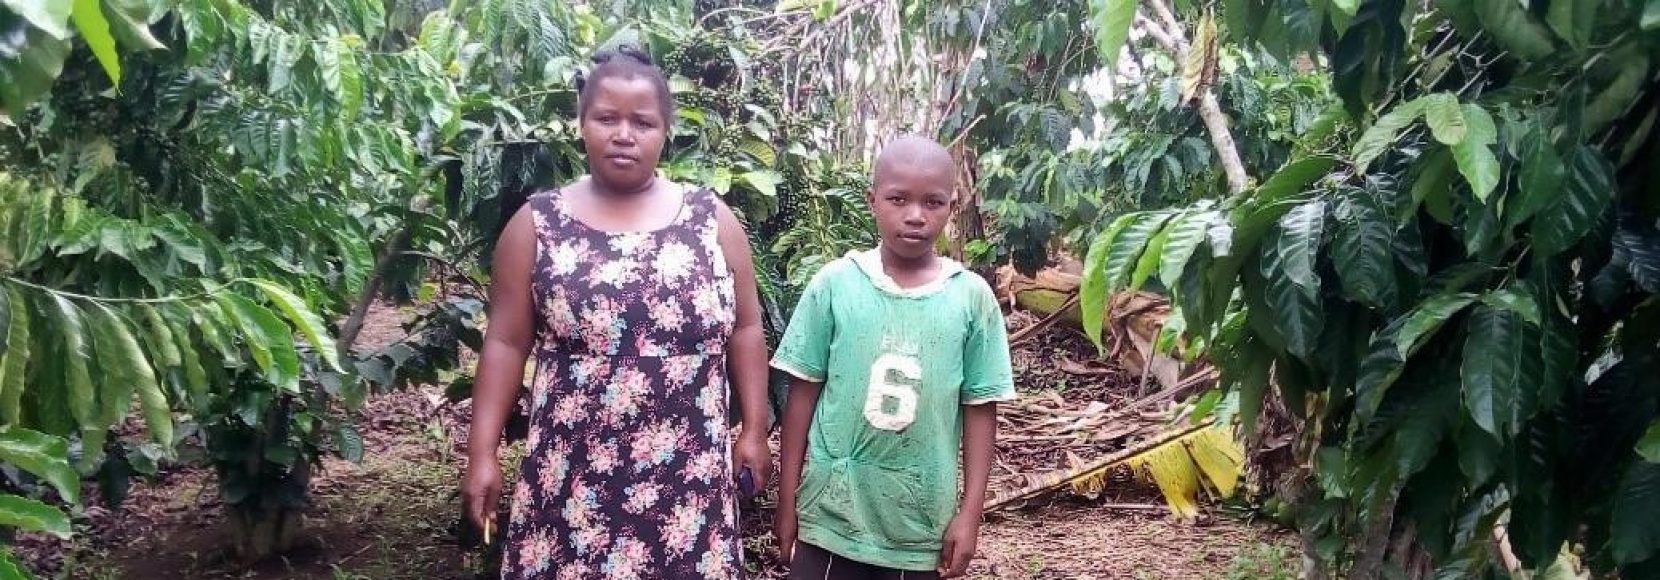 As Coffee farmers face the COVID-19 Crisis worldwide, Biringwa is no exception. Featured here, she stands with her son on their farm in Uganda